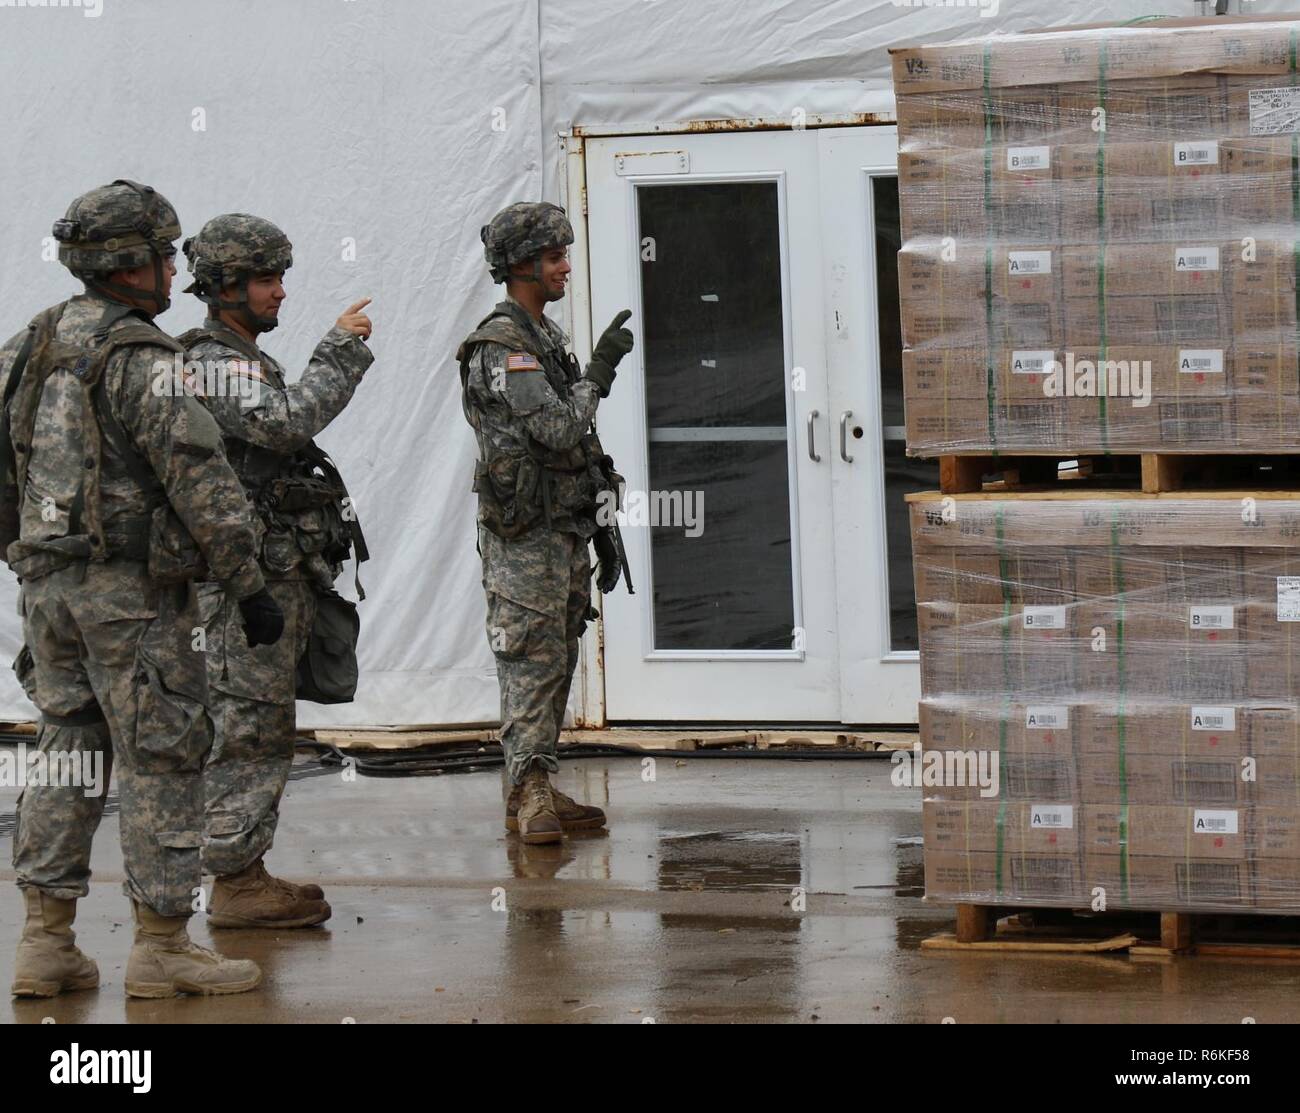 U.S. Army Reserve Soldiers with the 79th Quartermaster Company based in Houston, Texas, count pallets of Meals Ready-to-Eat during Joint Readiness Training Center (JRTC) Rotation 17-07, at Fort Polk, Louisiana, May 5 to 26, 2017.  JRTC provides America’s military forces relevant, rigorous, multi-echelon training in a decisive action and mission rehearsal exercise environment to develop adaptive leaders, confident units, and robust capabilities across the range of military operations achieving Army readiness. Stock Photo